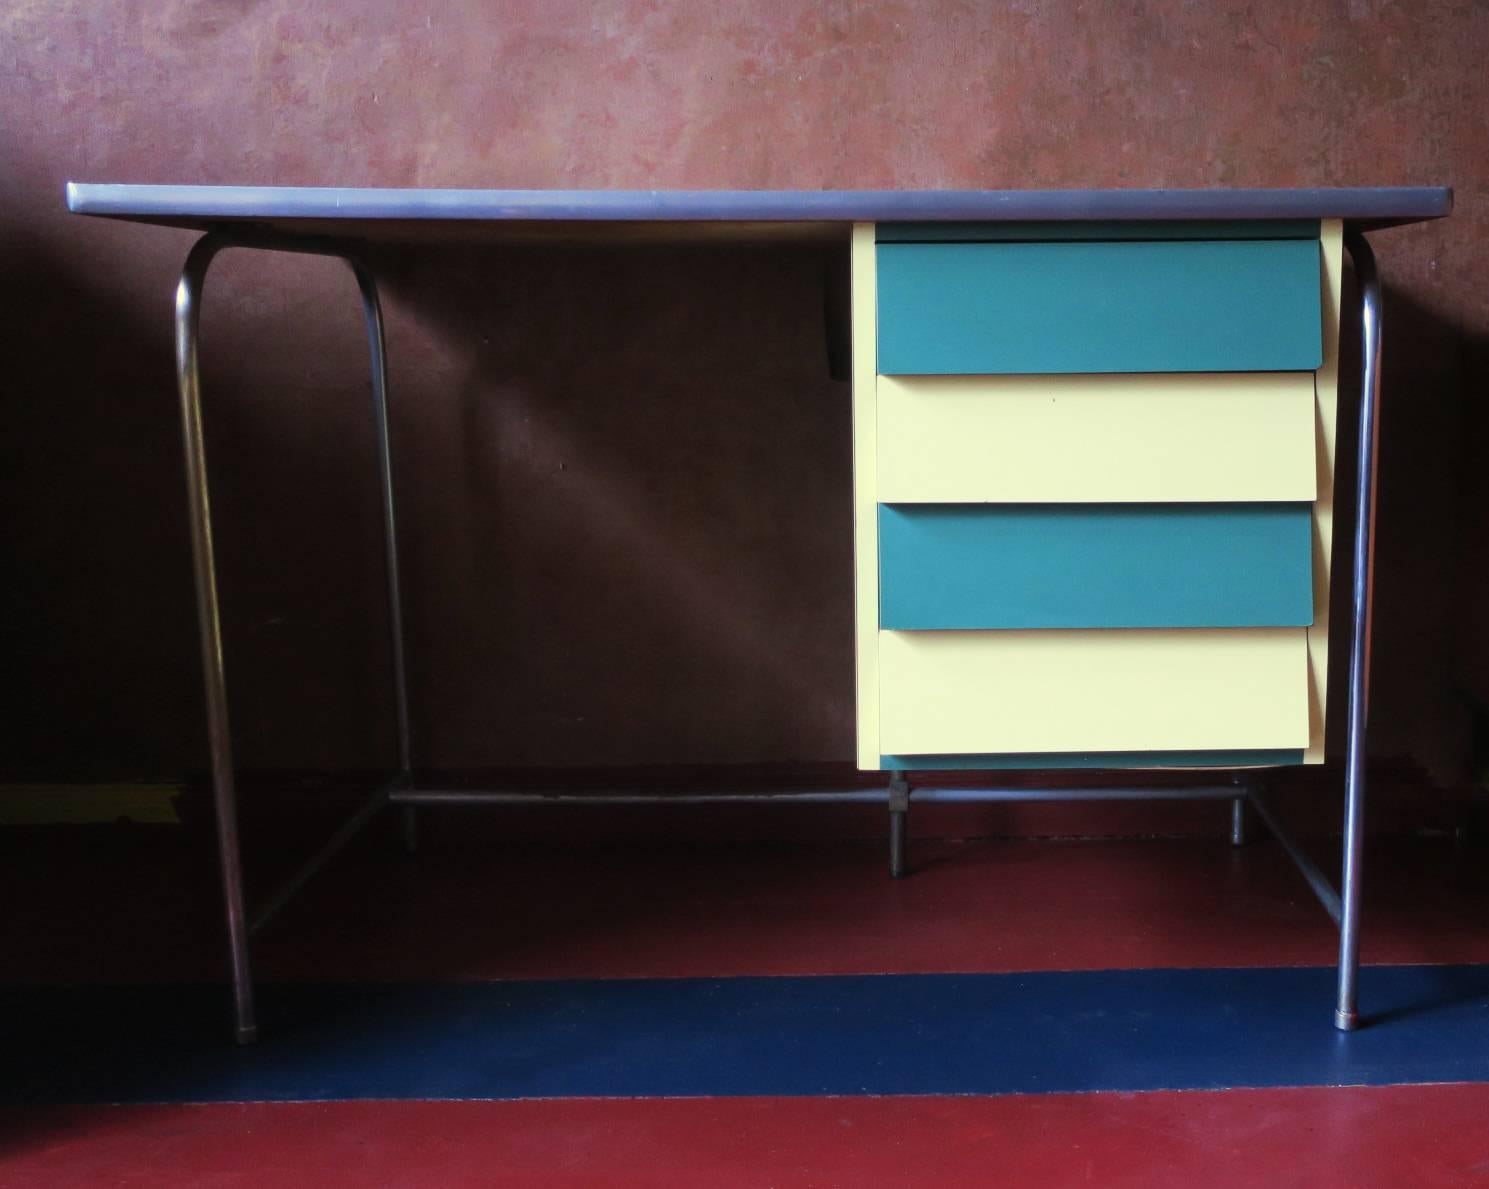 Colorful Italian Tubular Steel and Formica Desk, 1950s-1960s For Sale 1